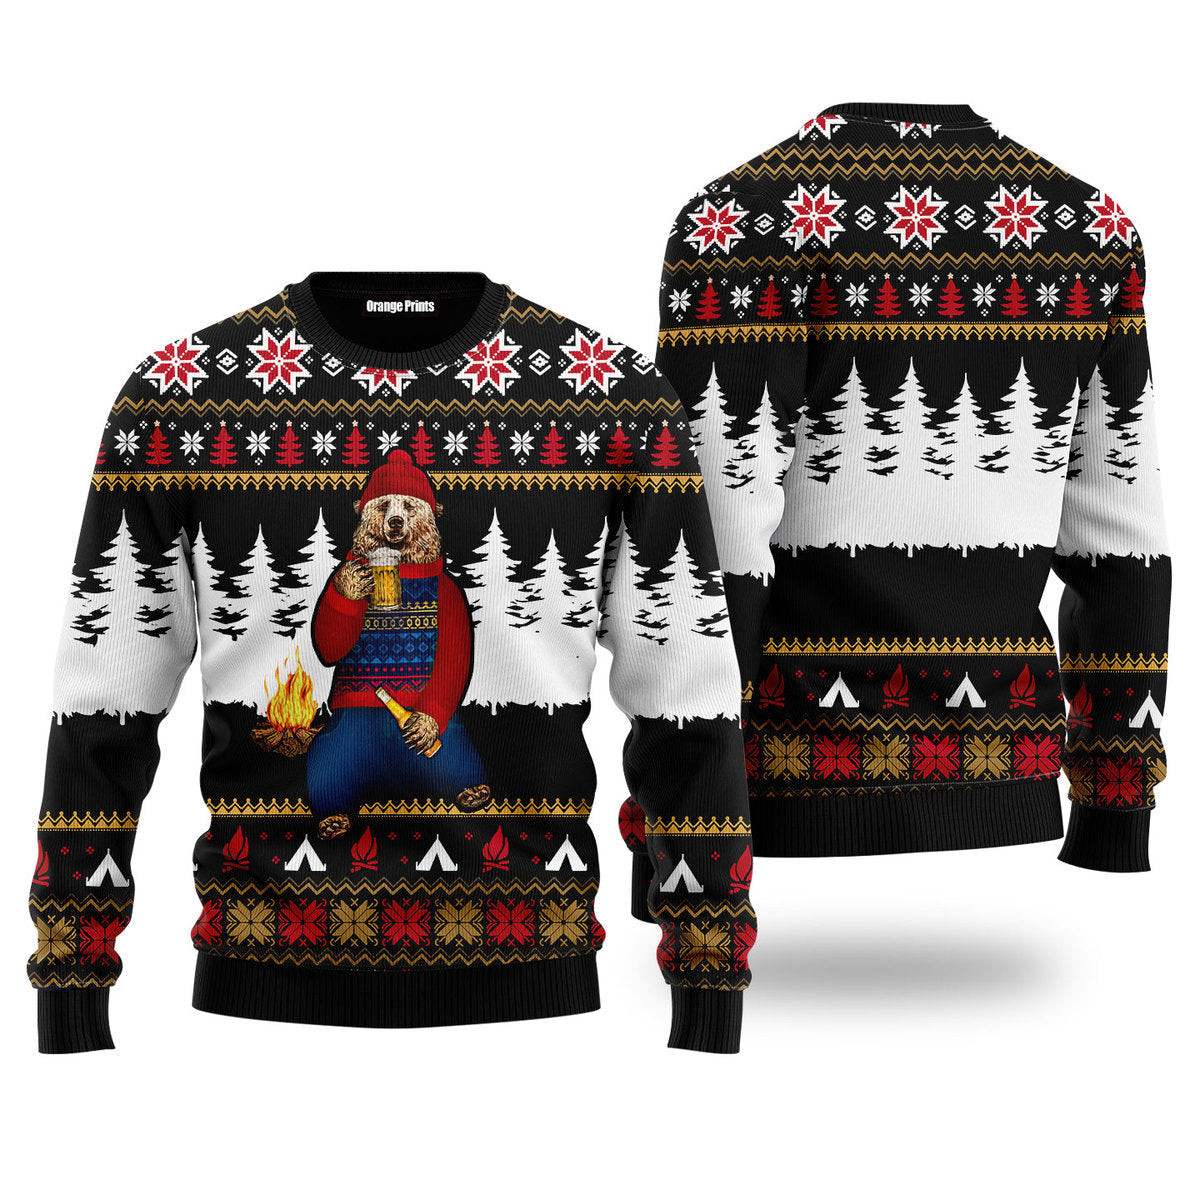 Bear Campfire Ugly Christmas Sweater Ugly Sweater For Men Women, Holiday Sweater